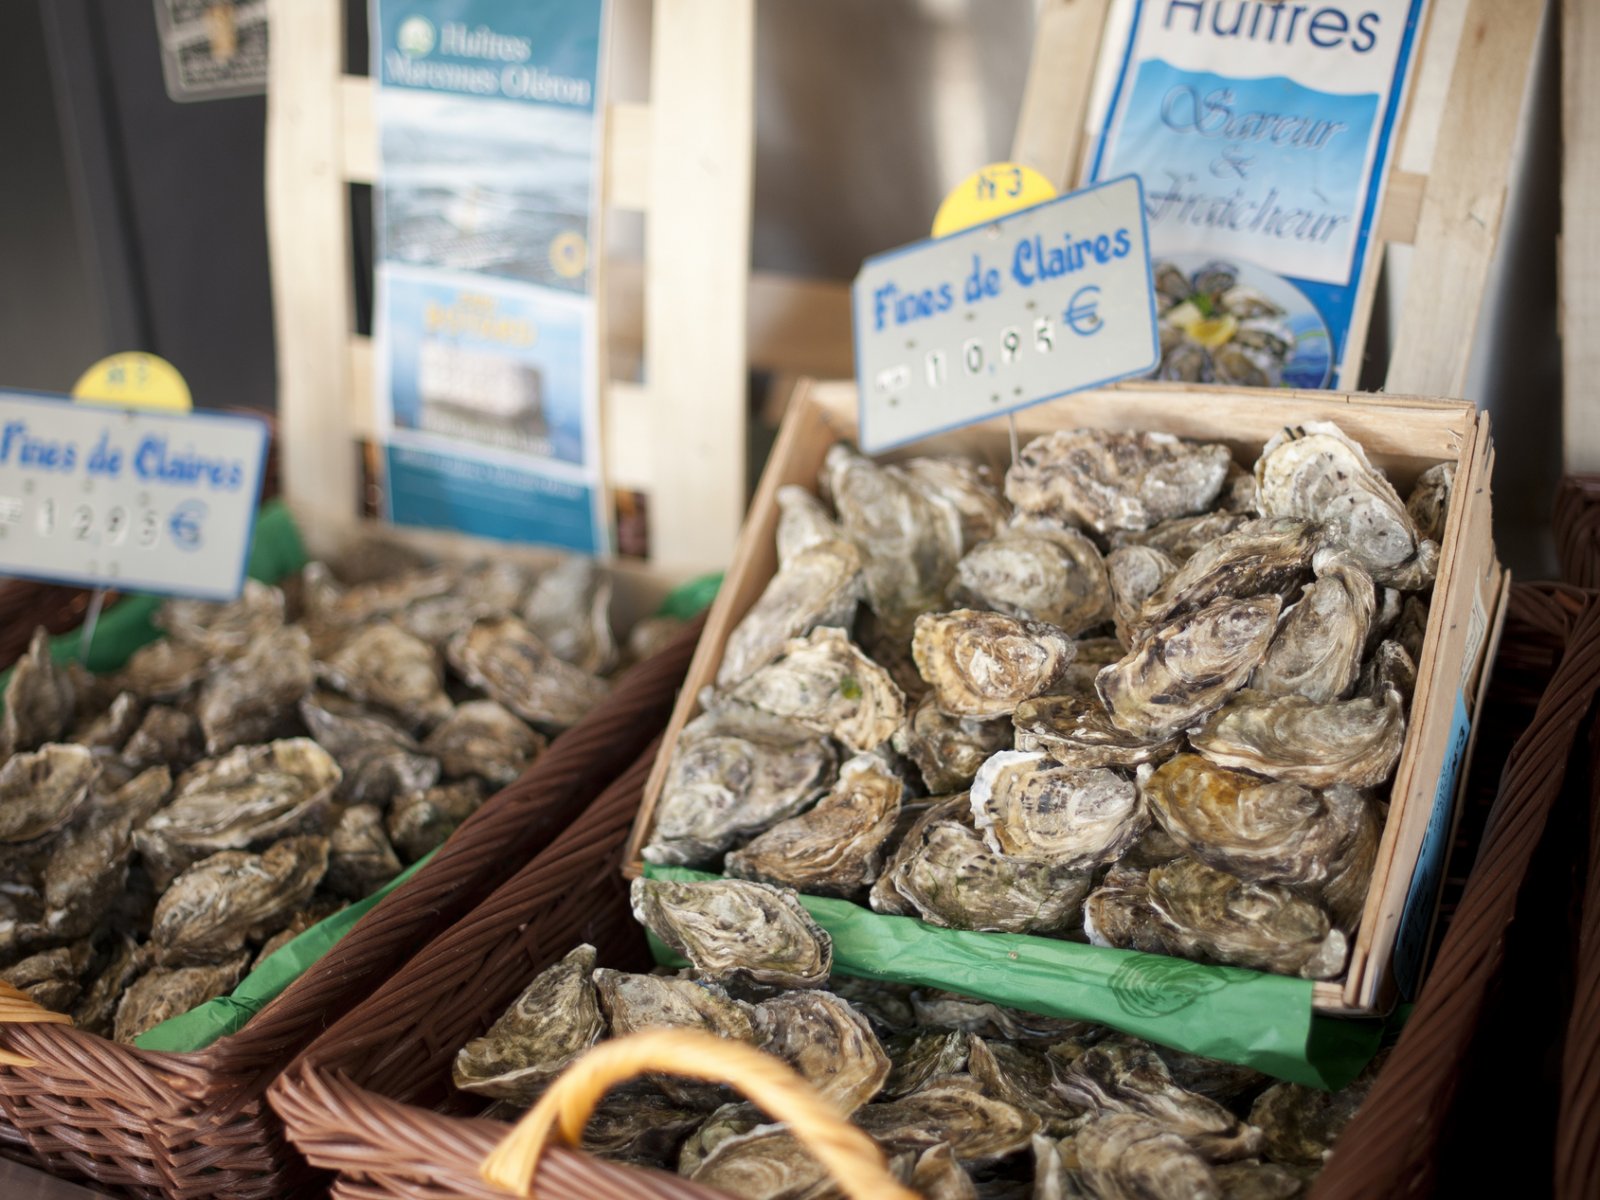 How to try oysters in Paris